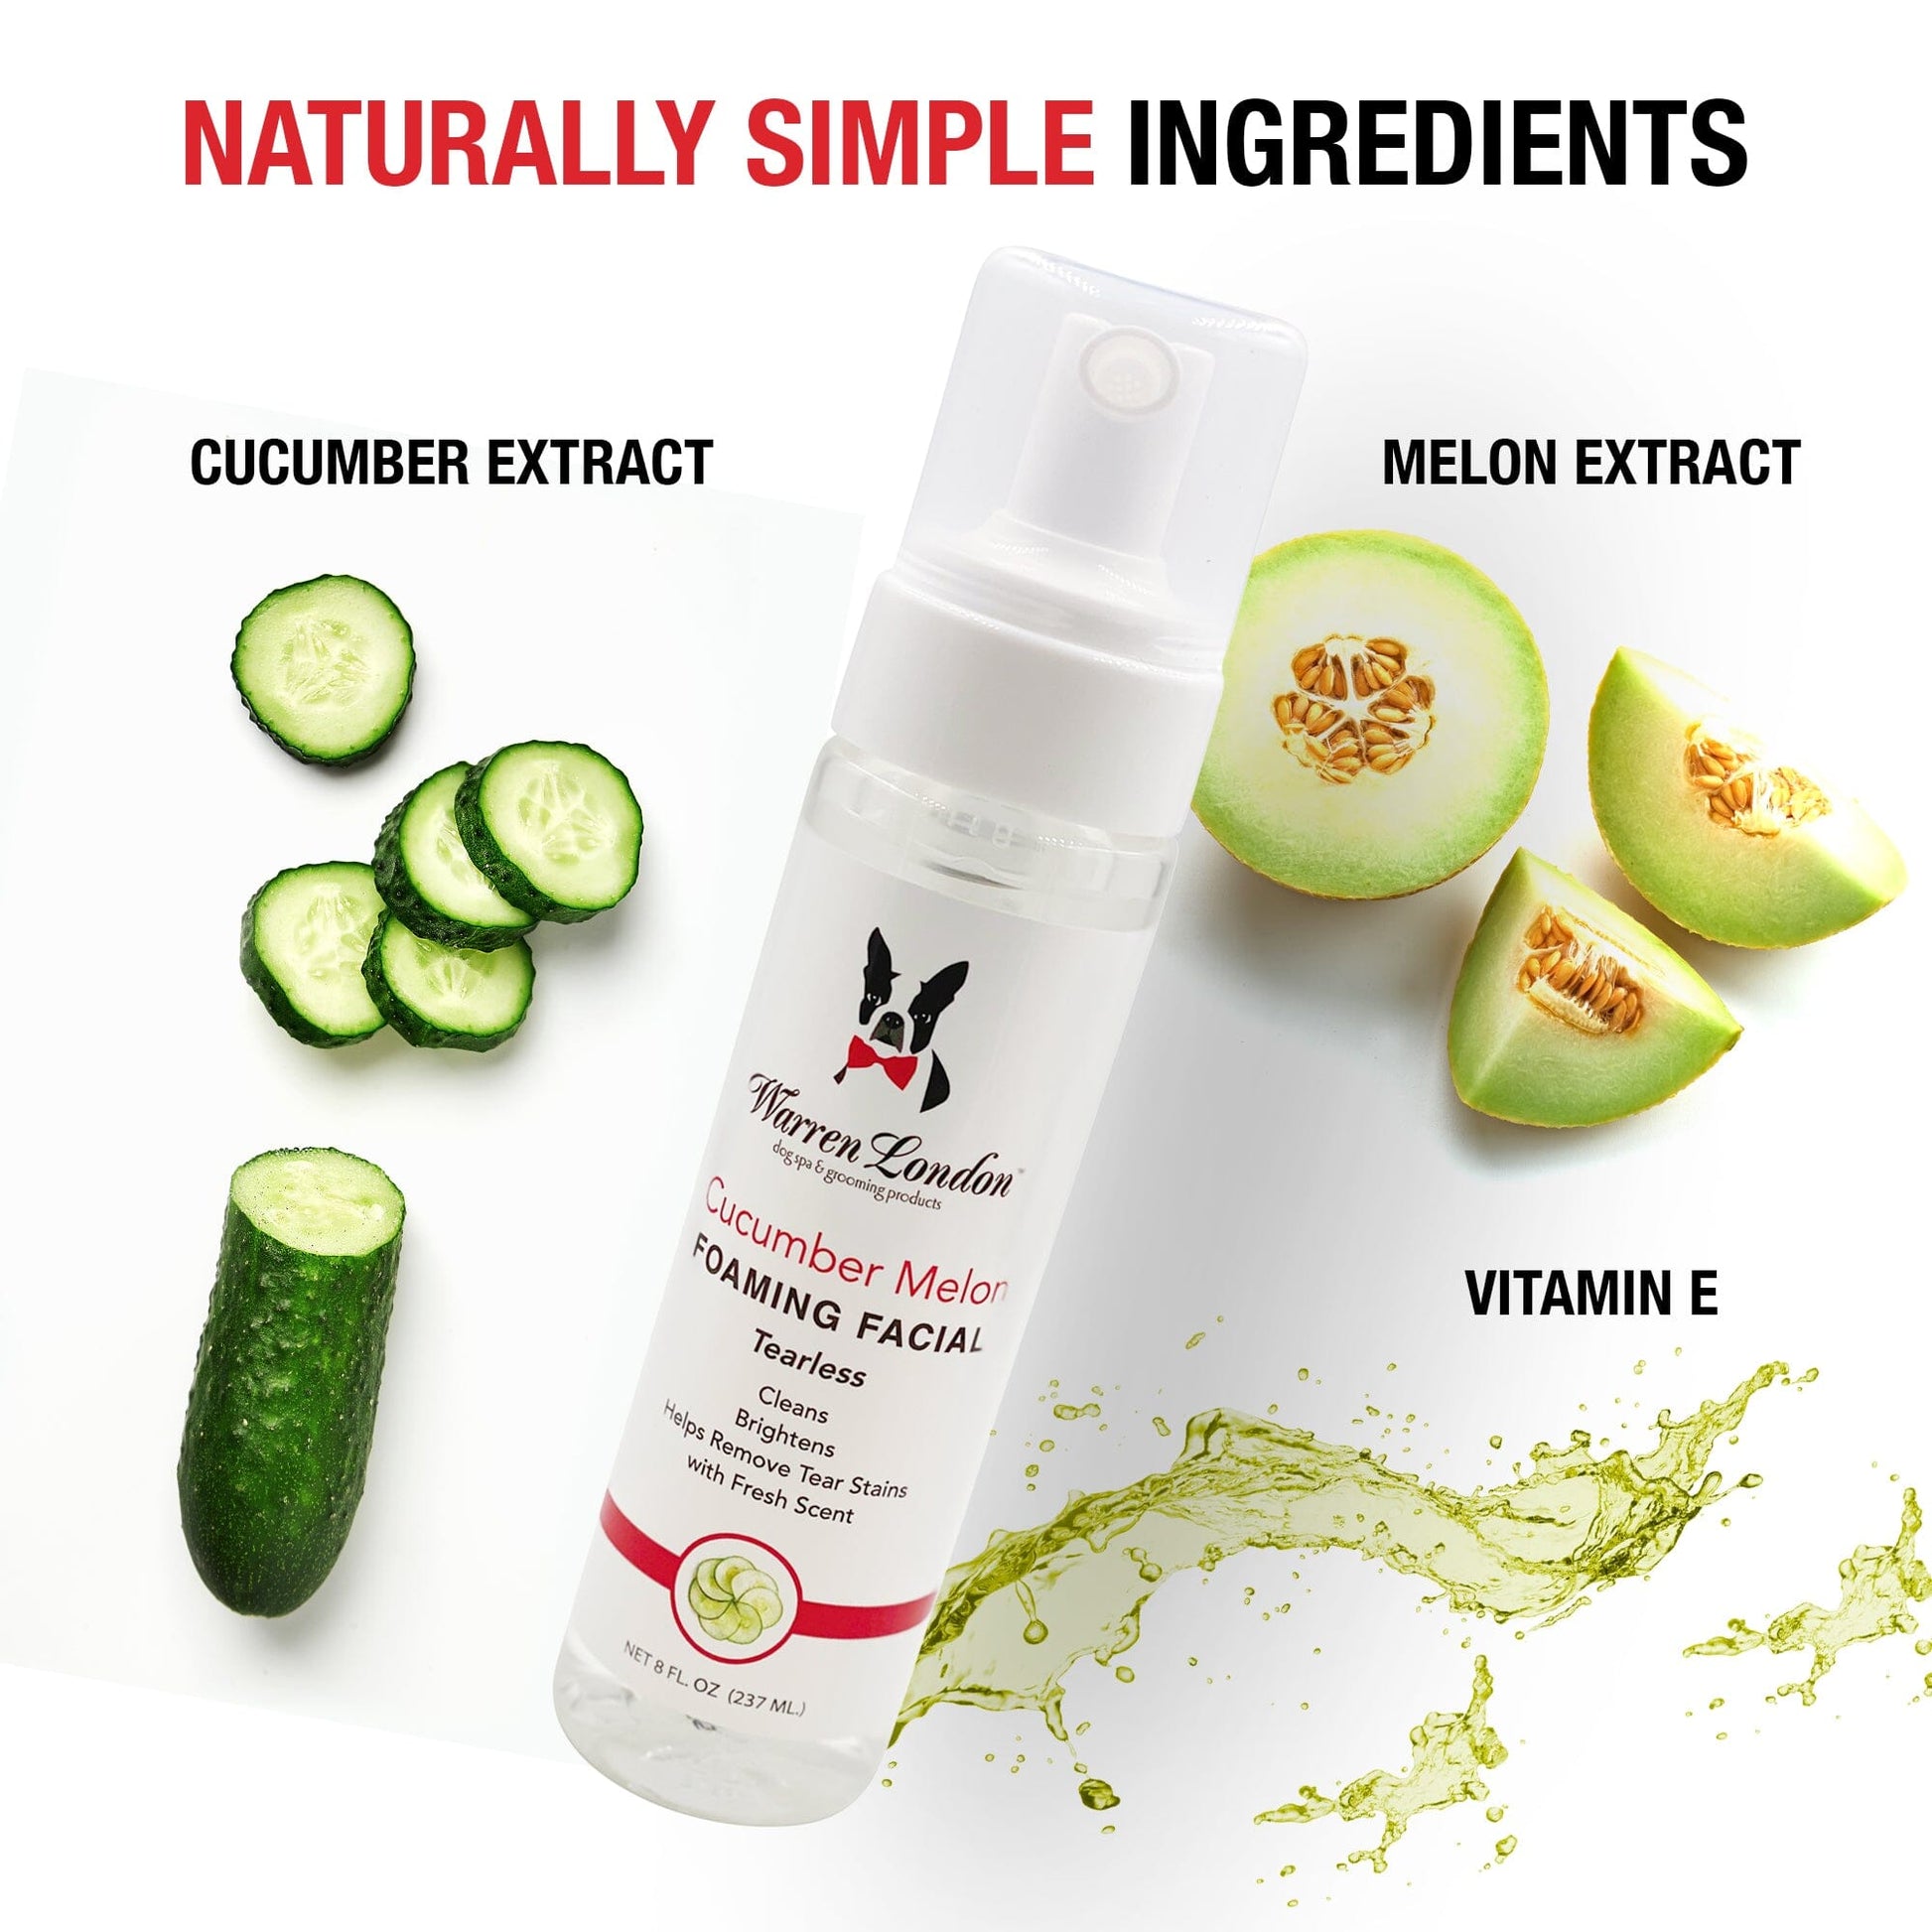 Cucumber Melon Foaming Facial - Professional Size - Refill Grooming Size Product Warren London 